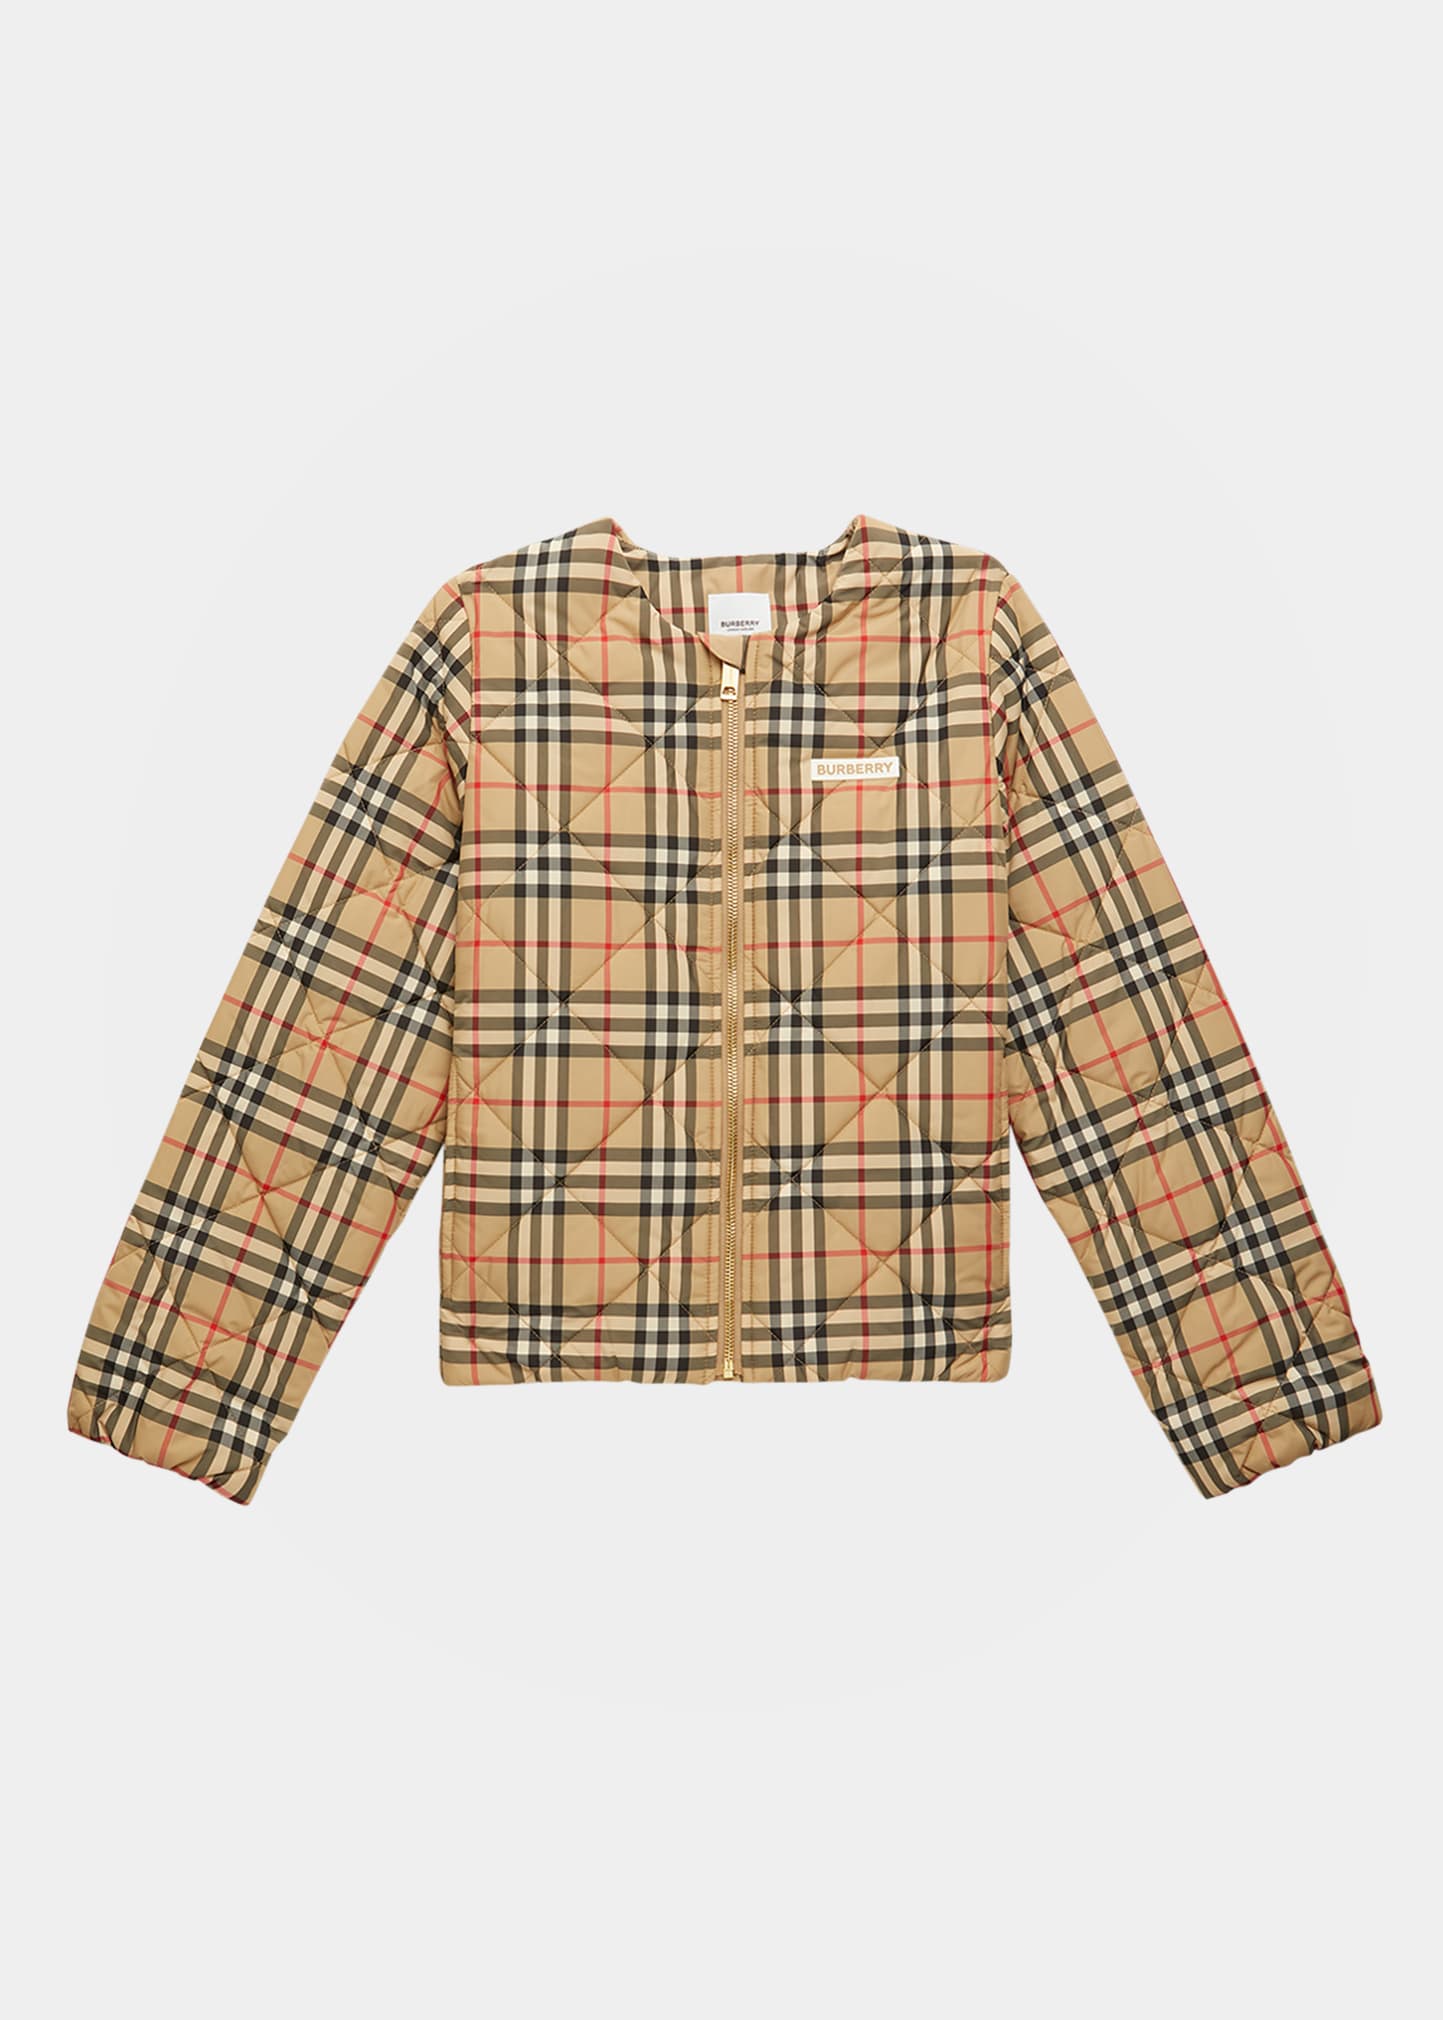 BURBERRY GIRL'S ABIGAIL QUILTED CHECK-PRINT CROPPED JACKET